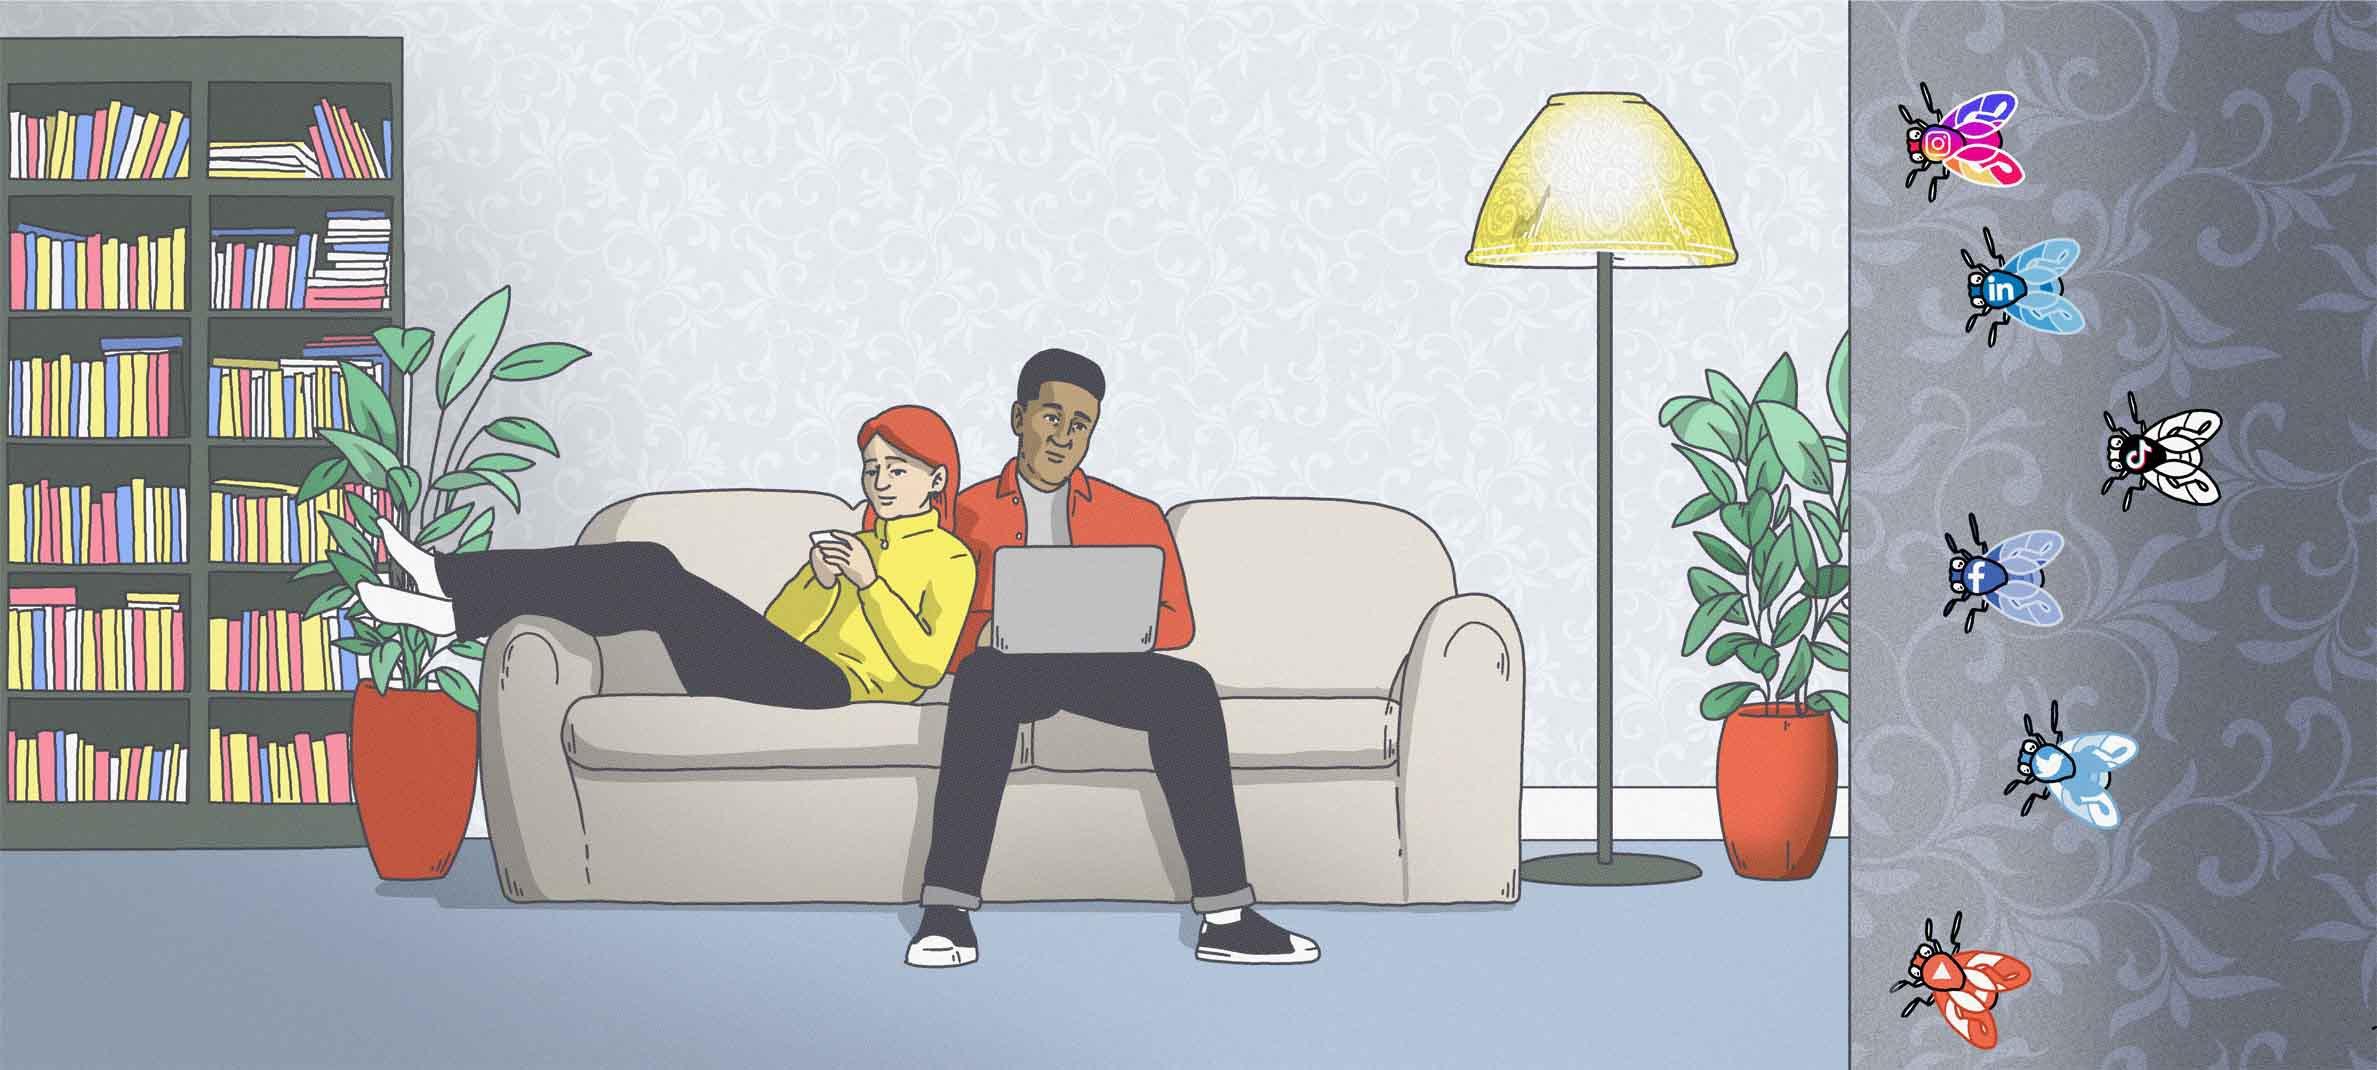 Man and woman on sofa with laptop and flies on wall nearby representing big social media companies